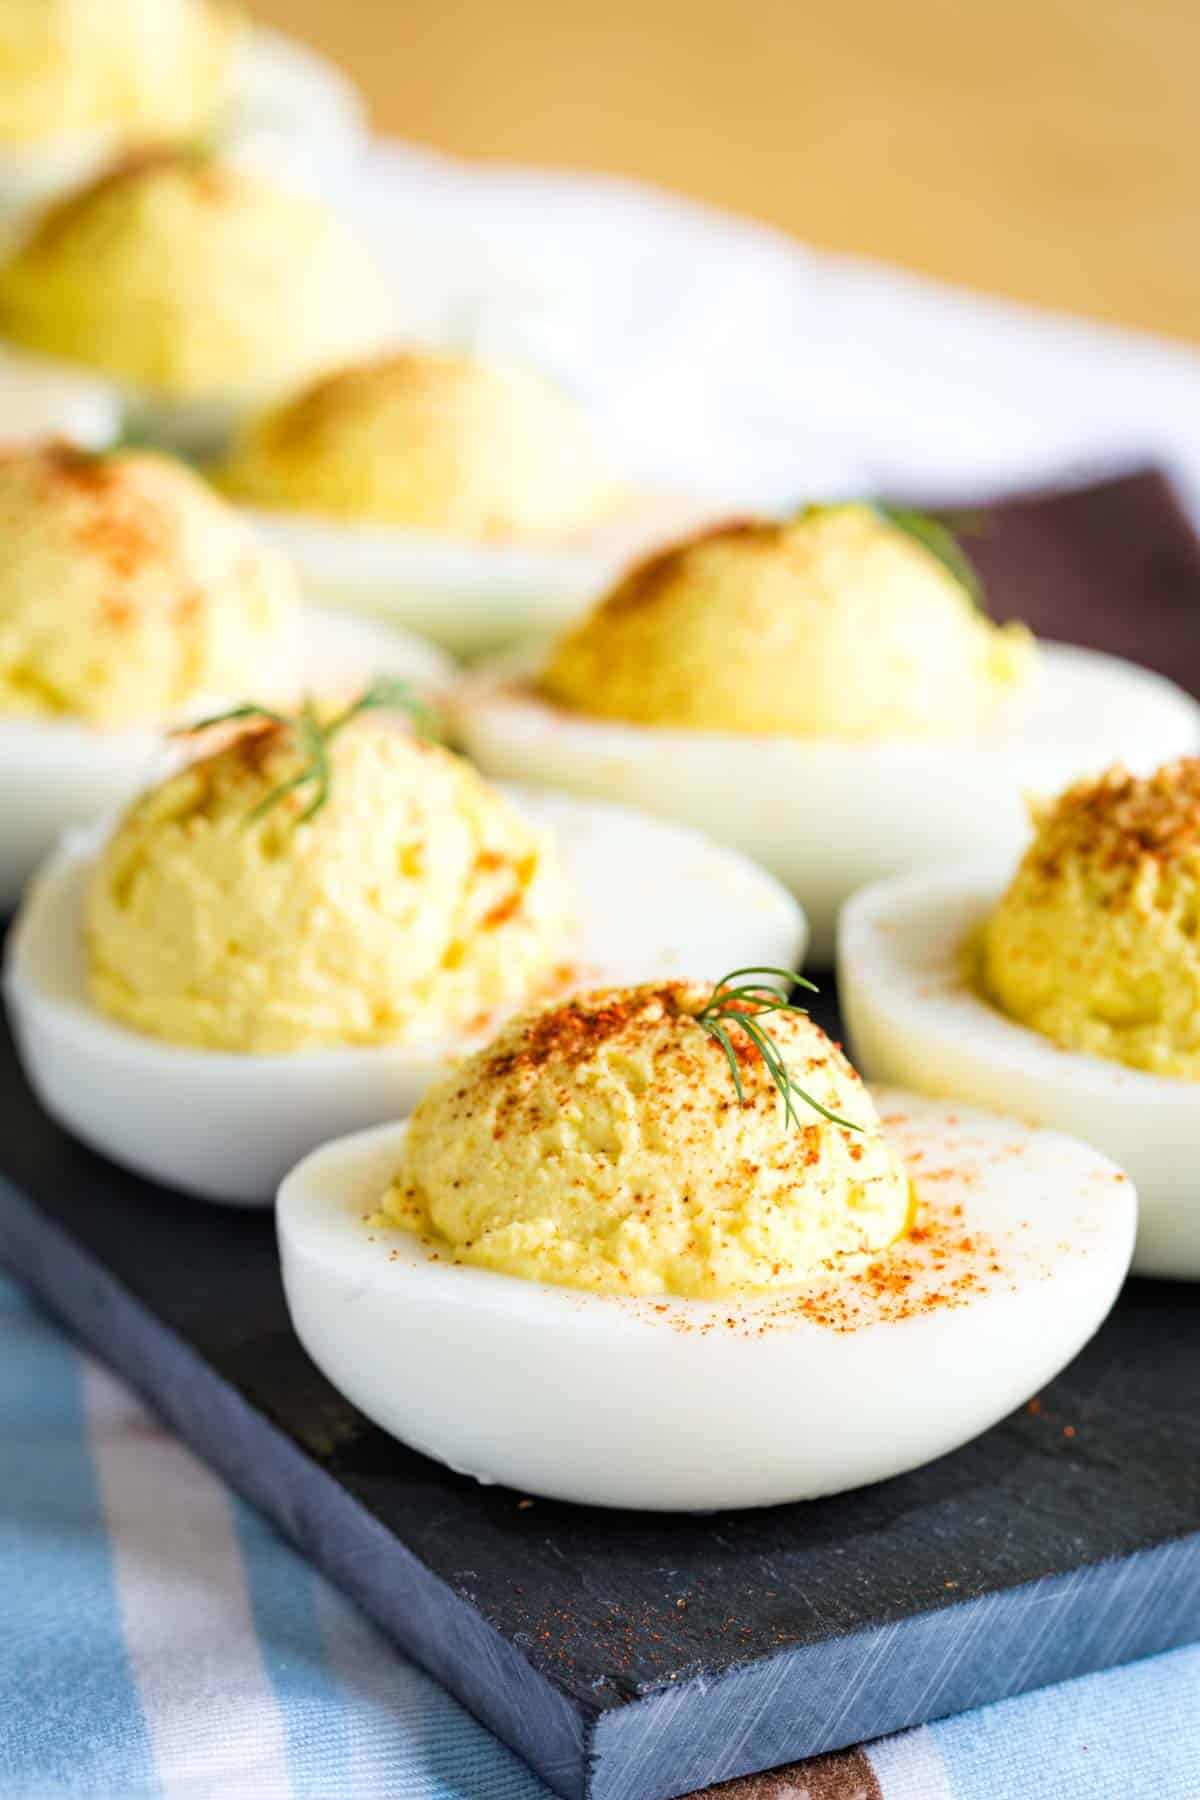 A closeup of a Deviled Egg garnished with paprika and dill with more blurred int he background on a platter.